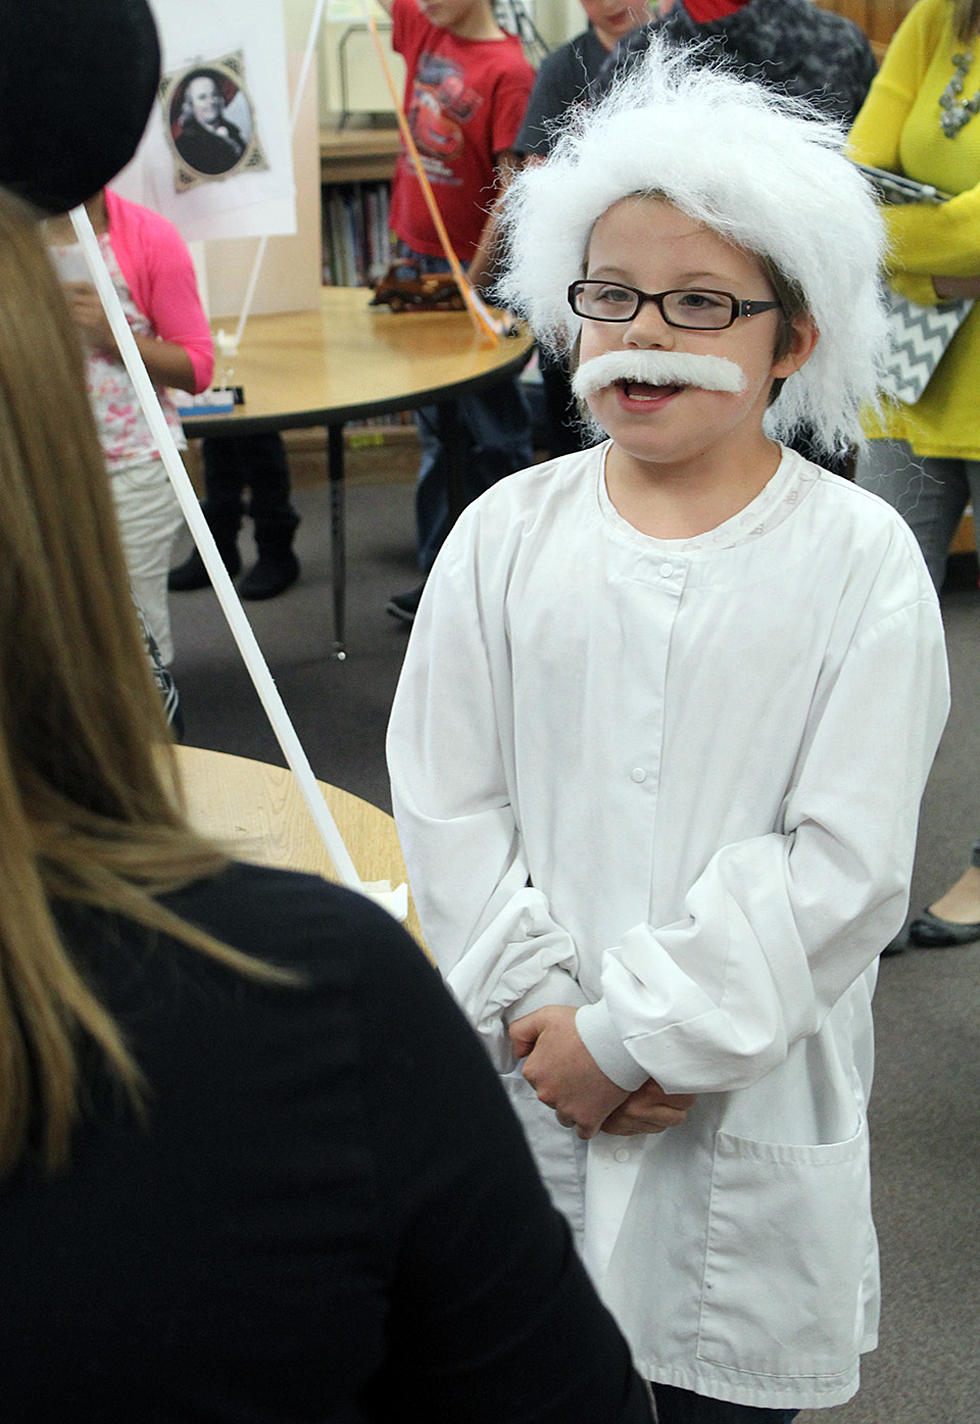 Skyline Elementary Students Become Living Museum of Inventors